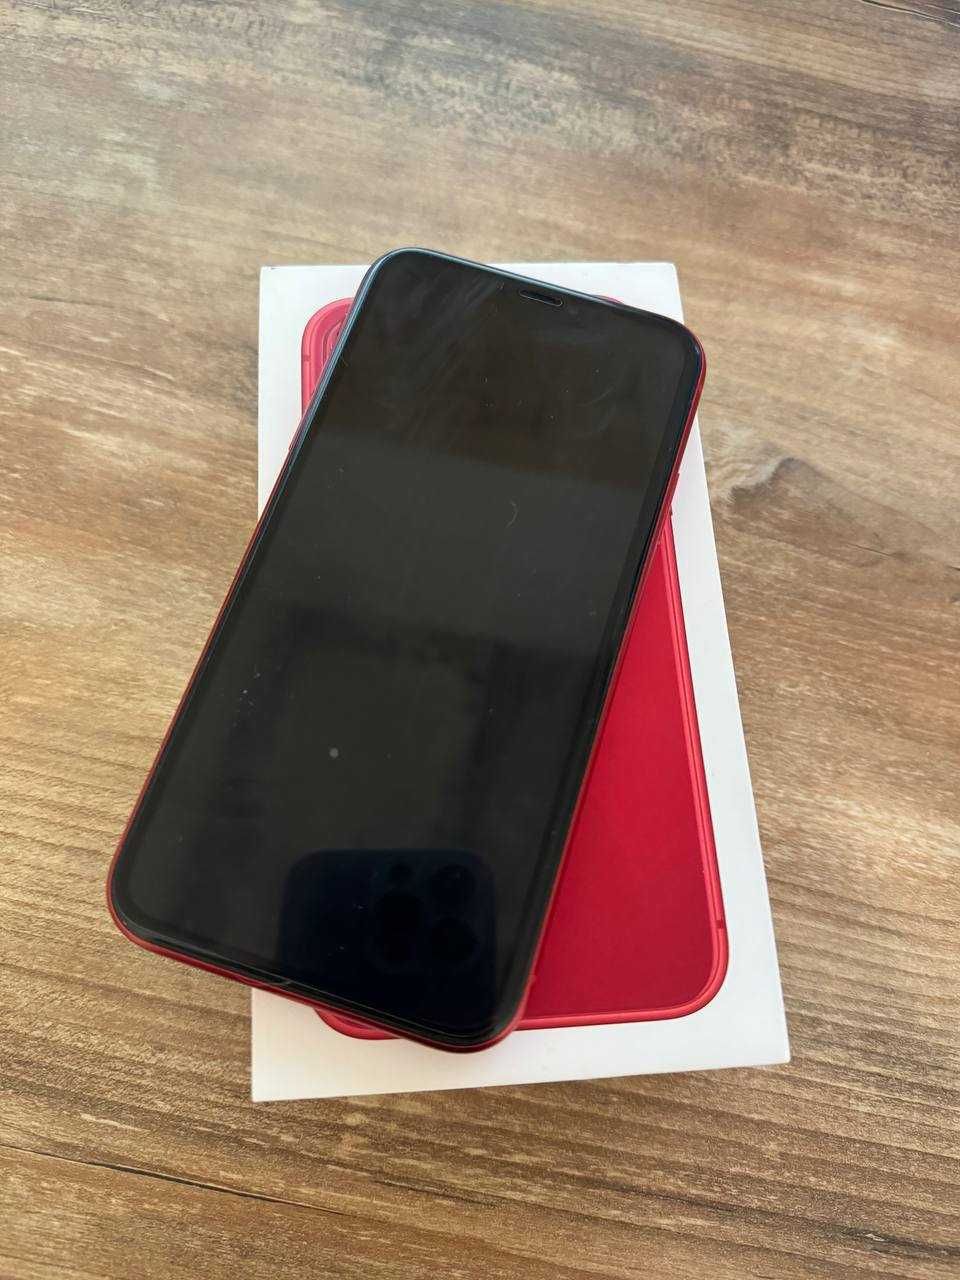 Iphone 11, 128gb, red